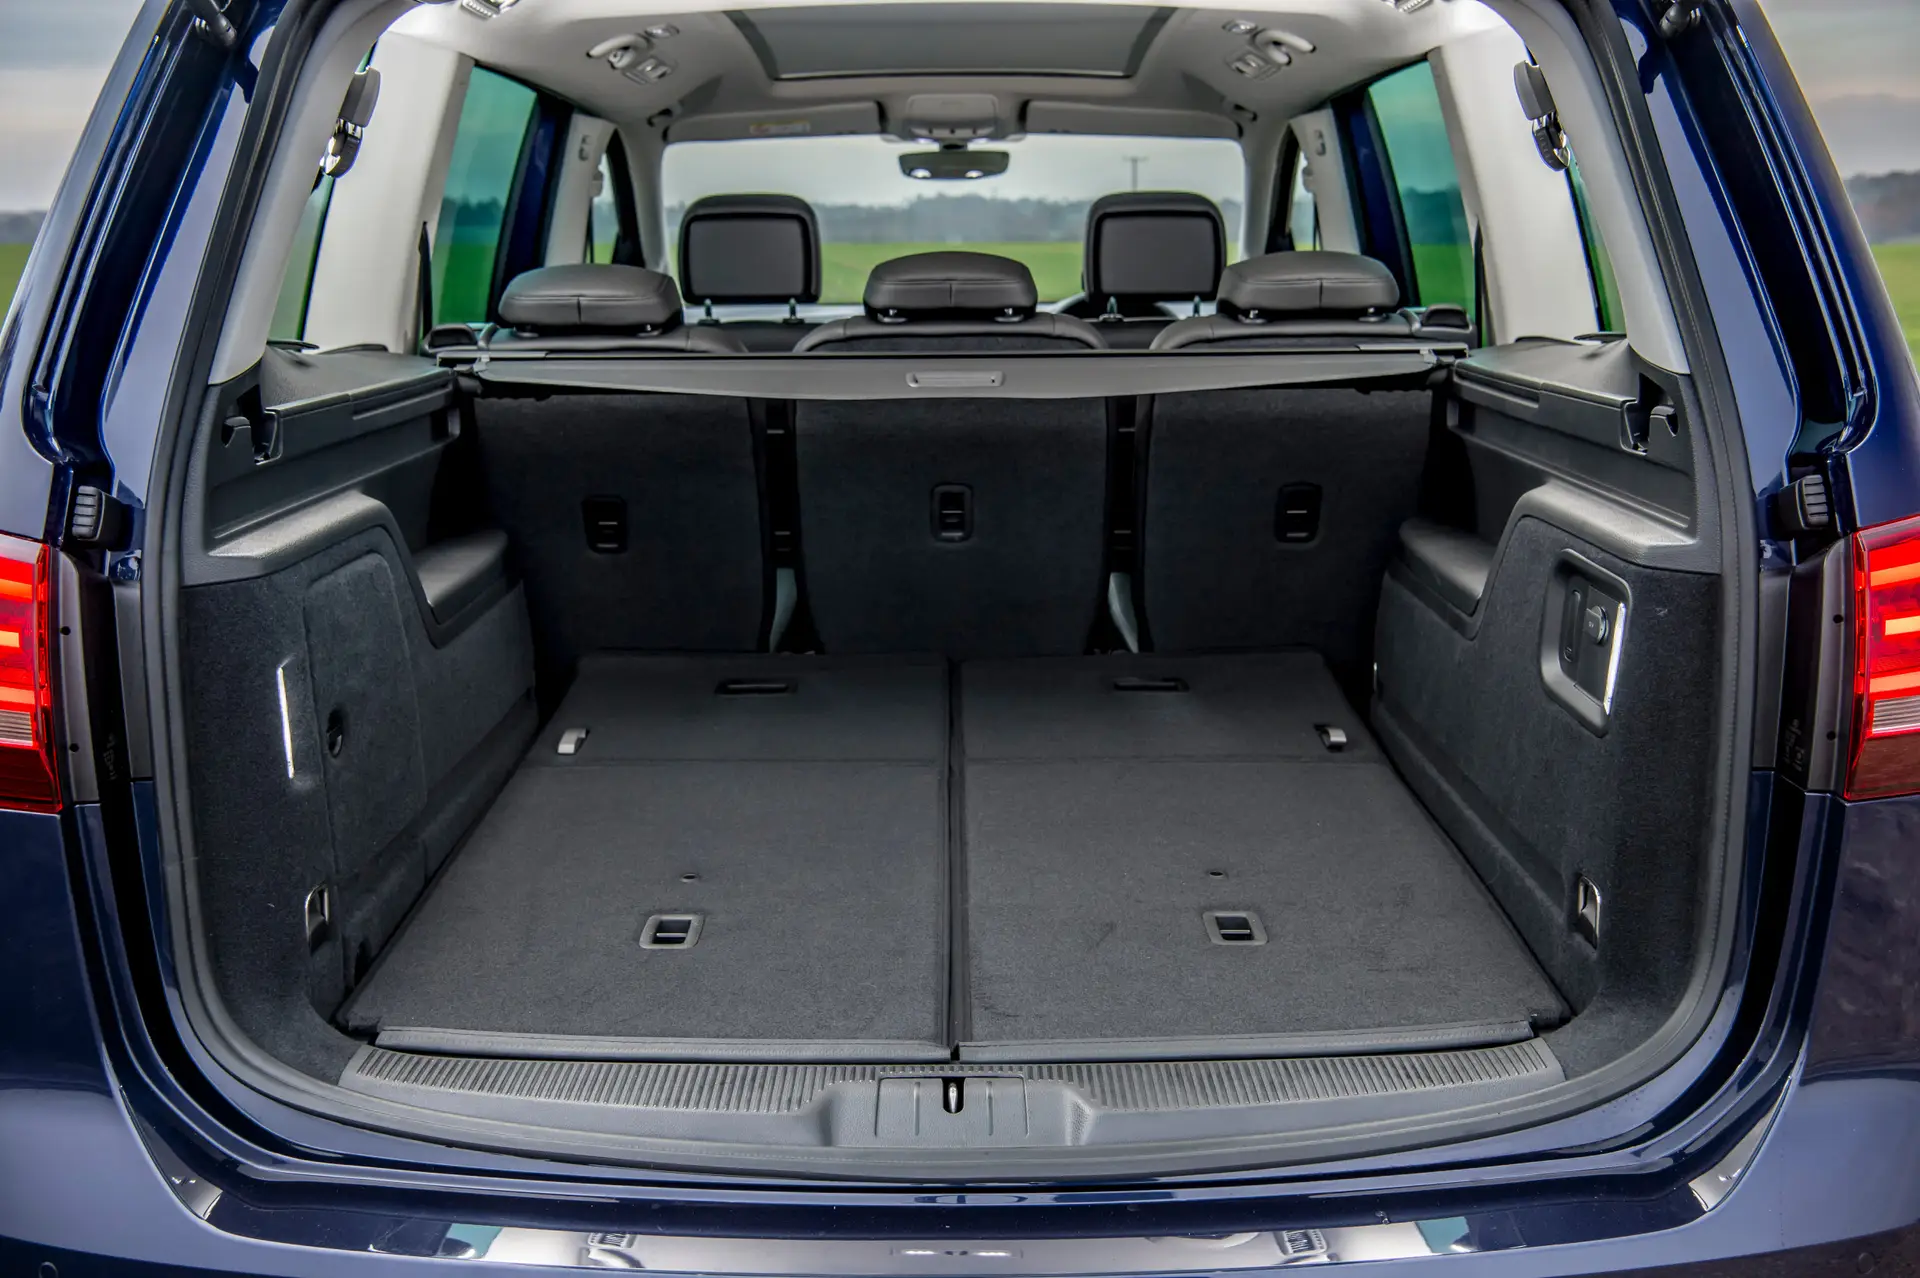 Volkswagen Sharan (2010-2021) Review: interior close up photo of the Volkswagen Sharan boot space